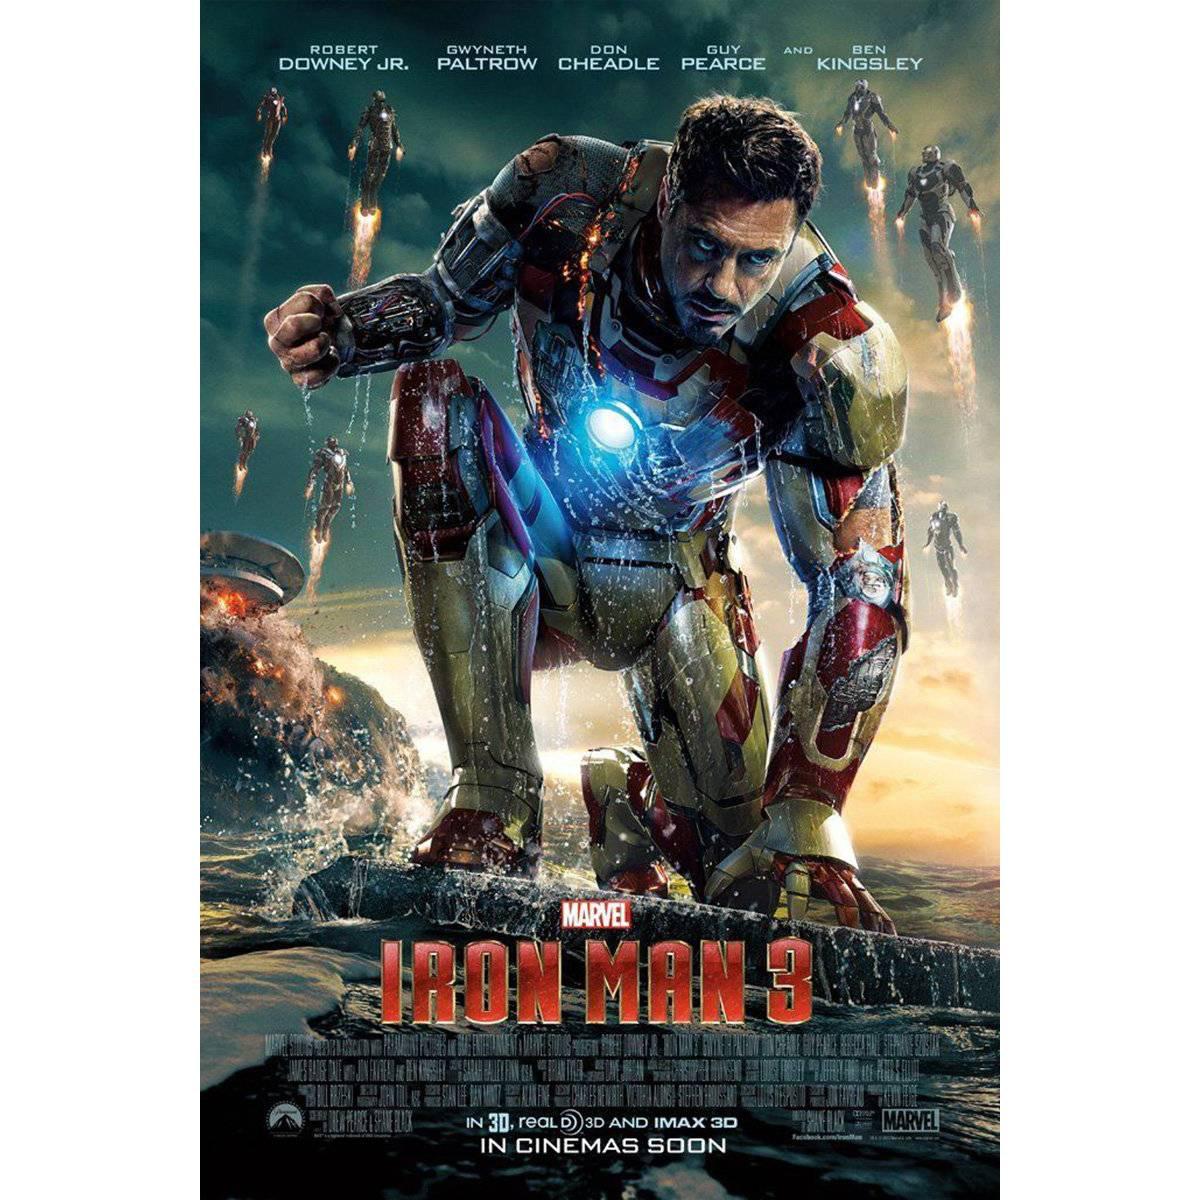 "Iron Man 3" Film Poster, 2013 For Sale